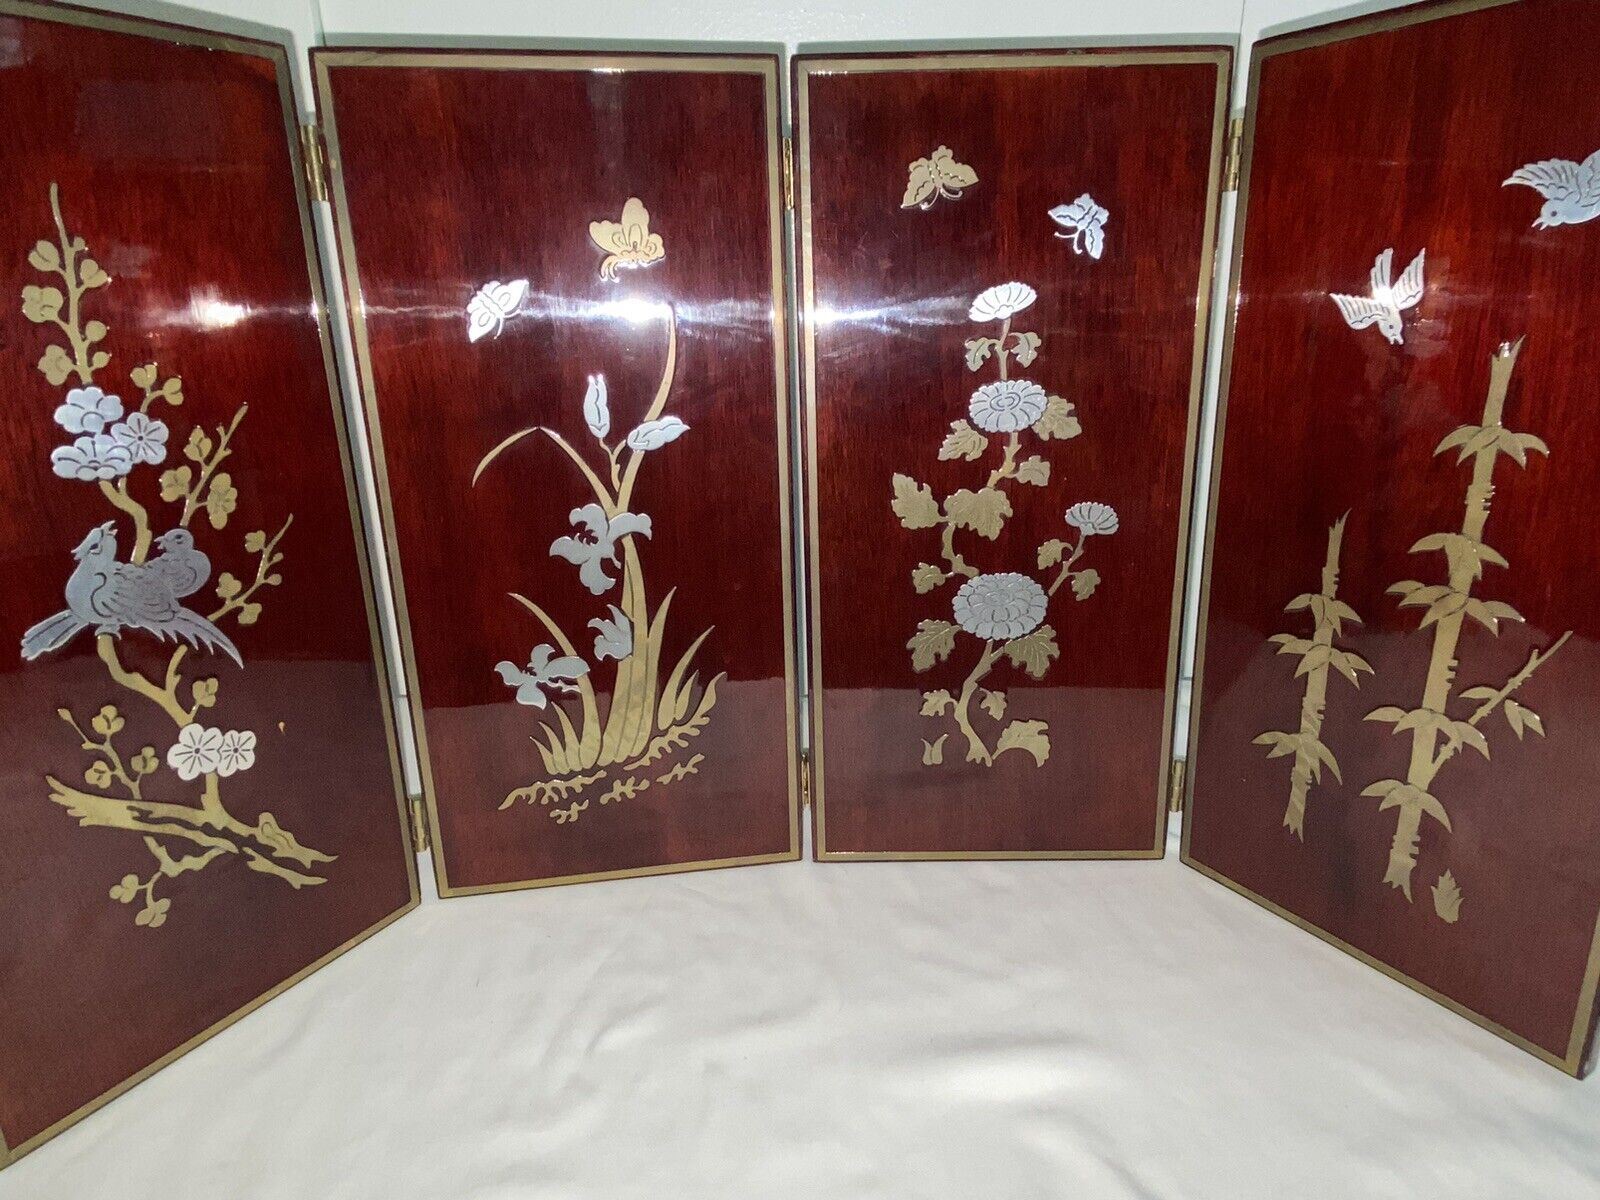 Korean 4 Panel Lacquer Table Screen Inlaid Metal Four Seasons Flowers 12” Tall